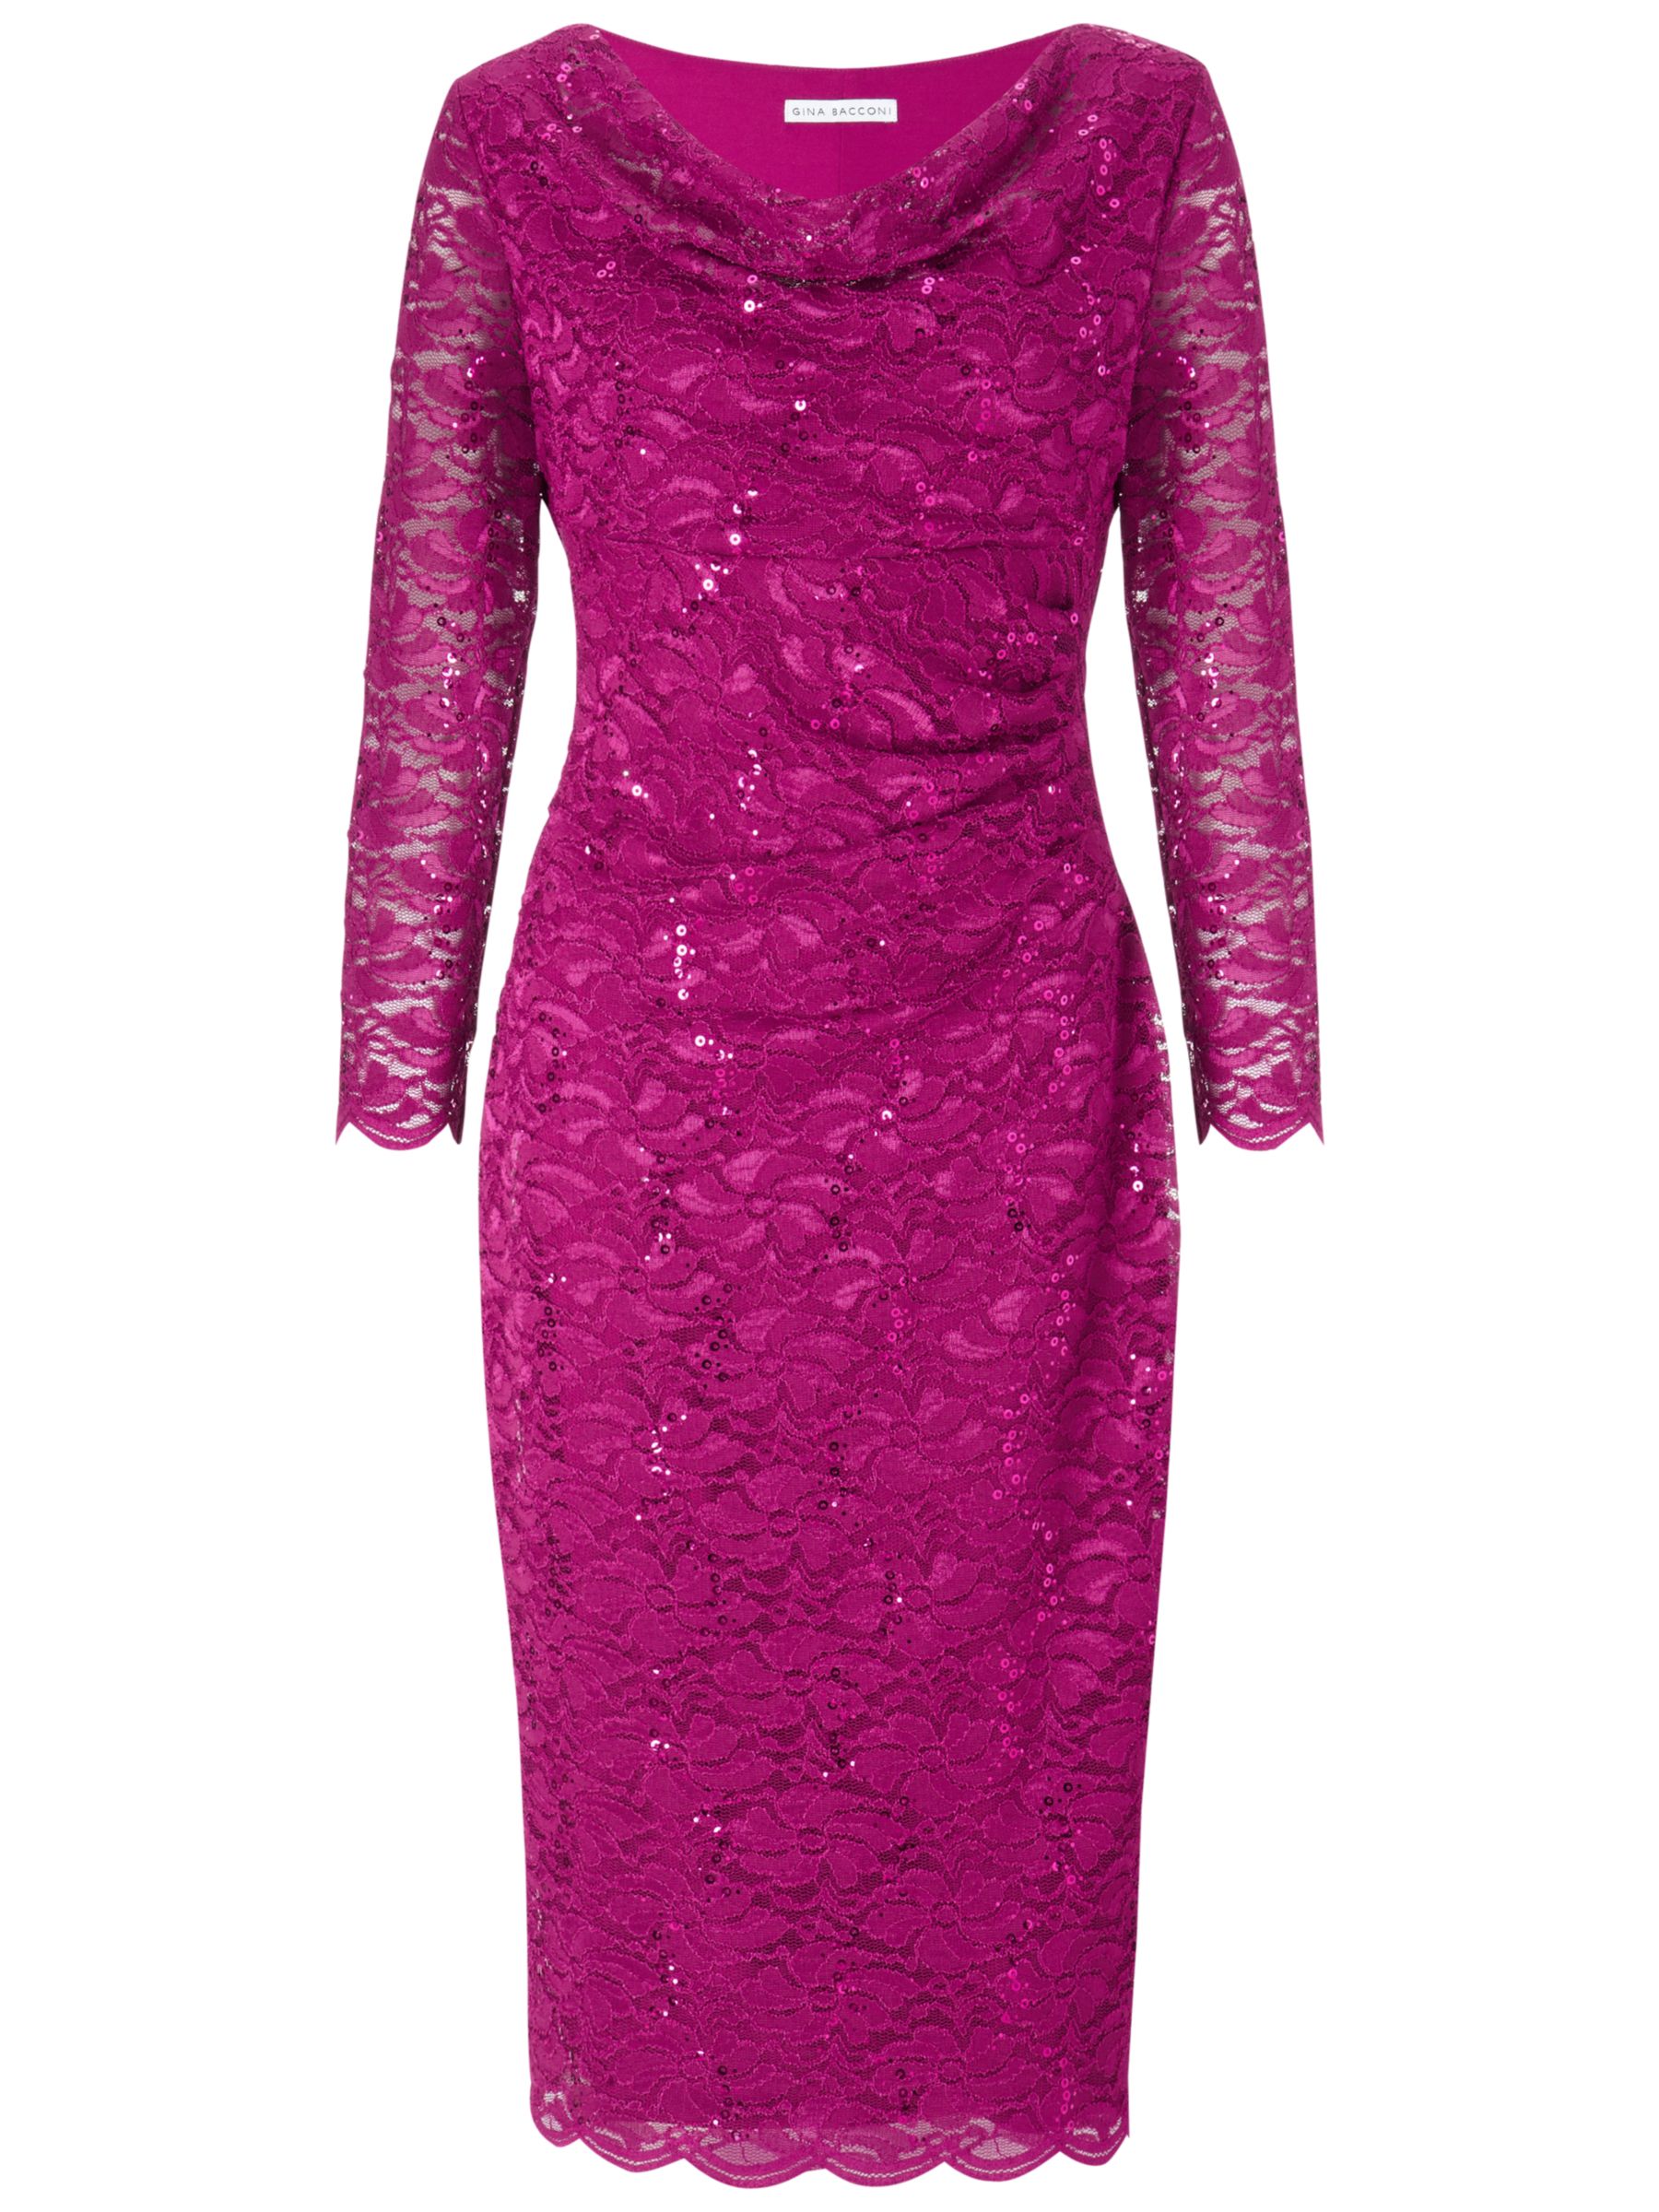 Gina Bacconi Sequinned Lace Cowl Neck Dress, Magenta at John Lewis ...